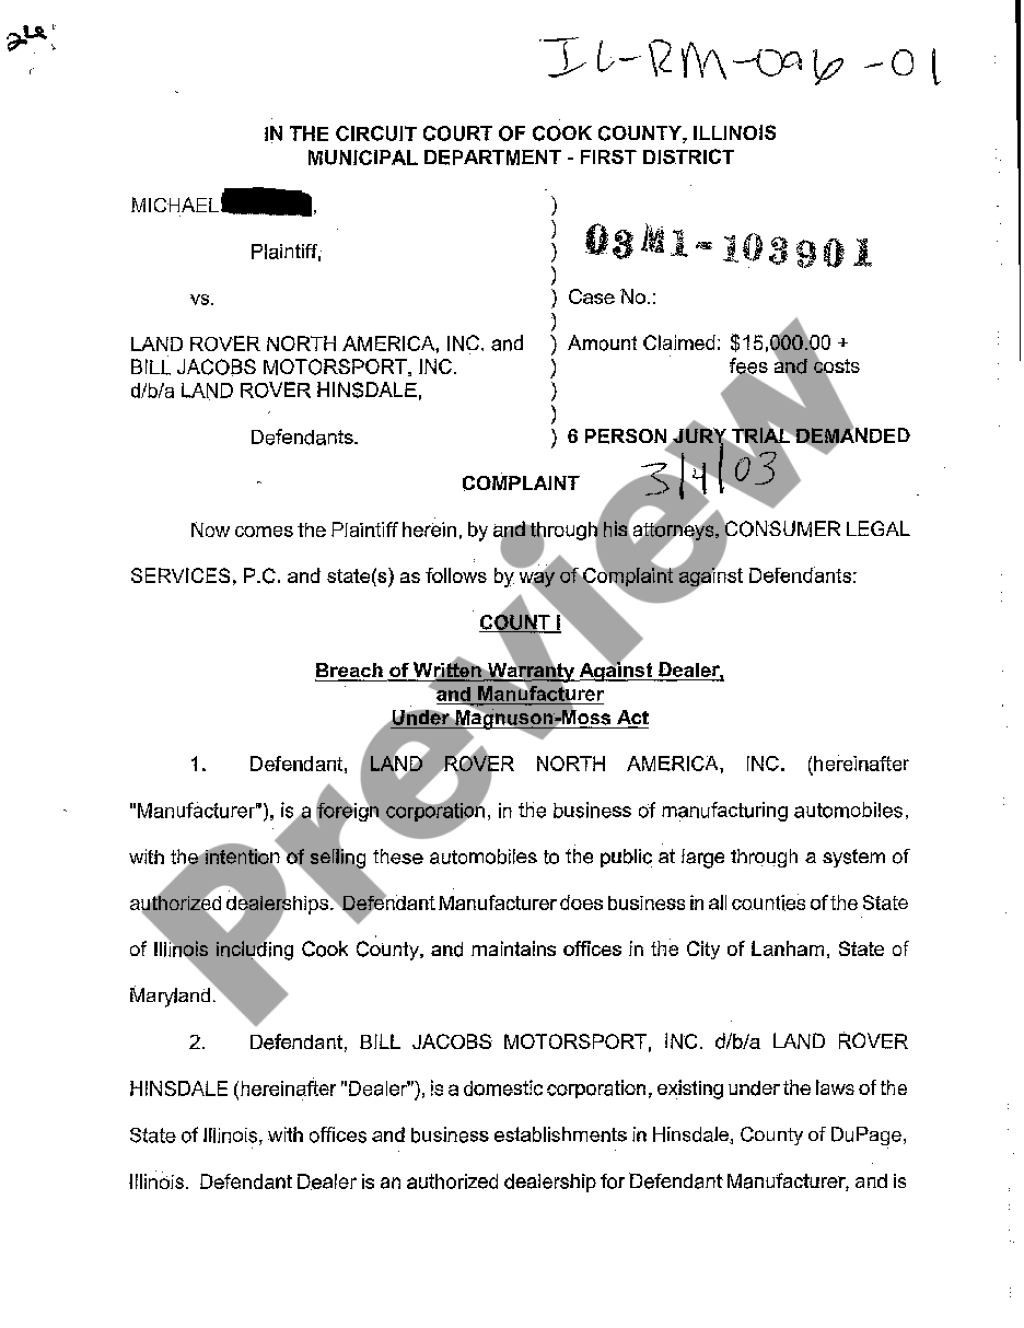 Picture of: Illinois Complaint Against Car Manufacturer for Breach of Warranty under  Magnuson Moss Act